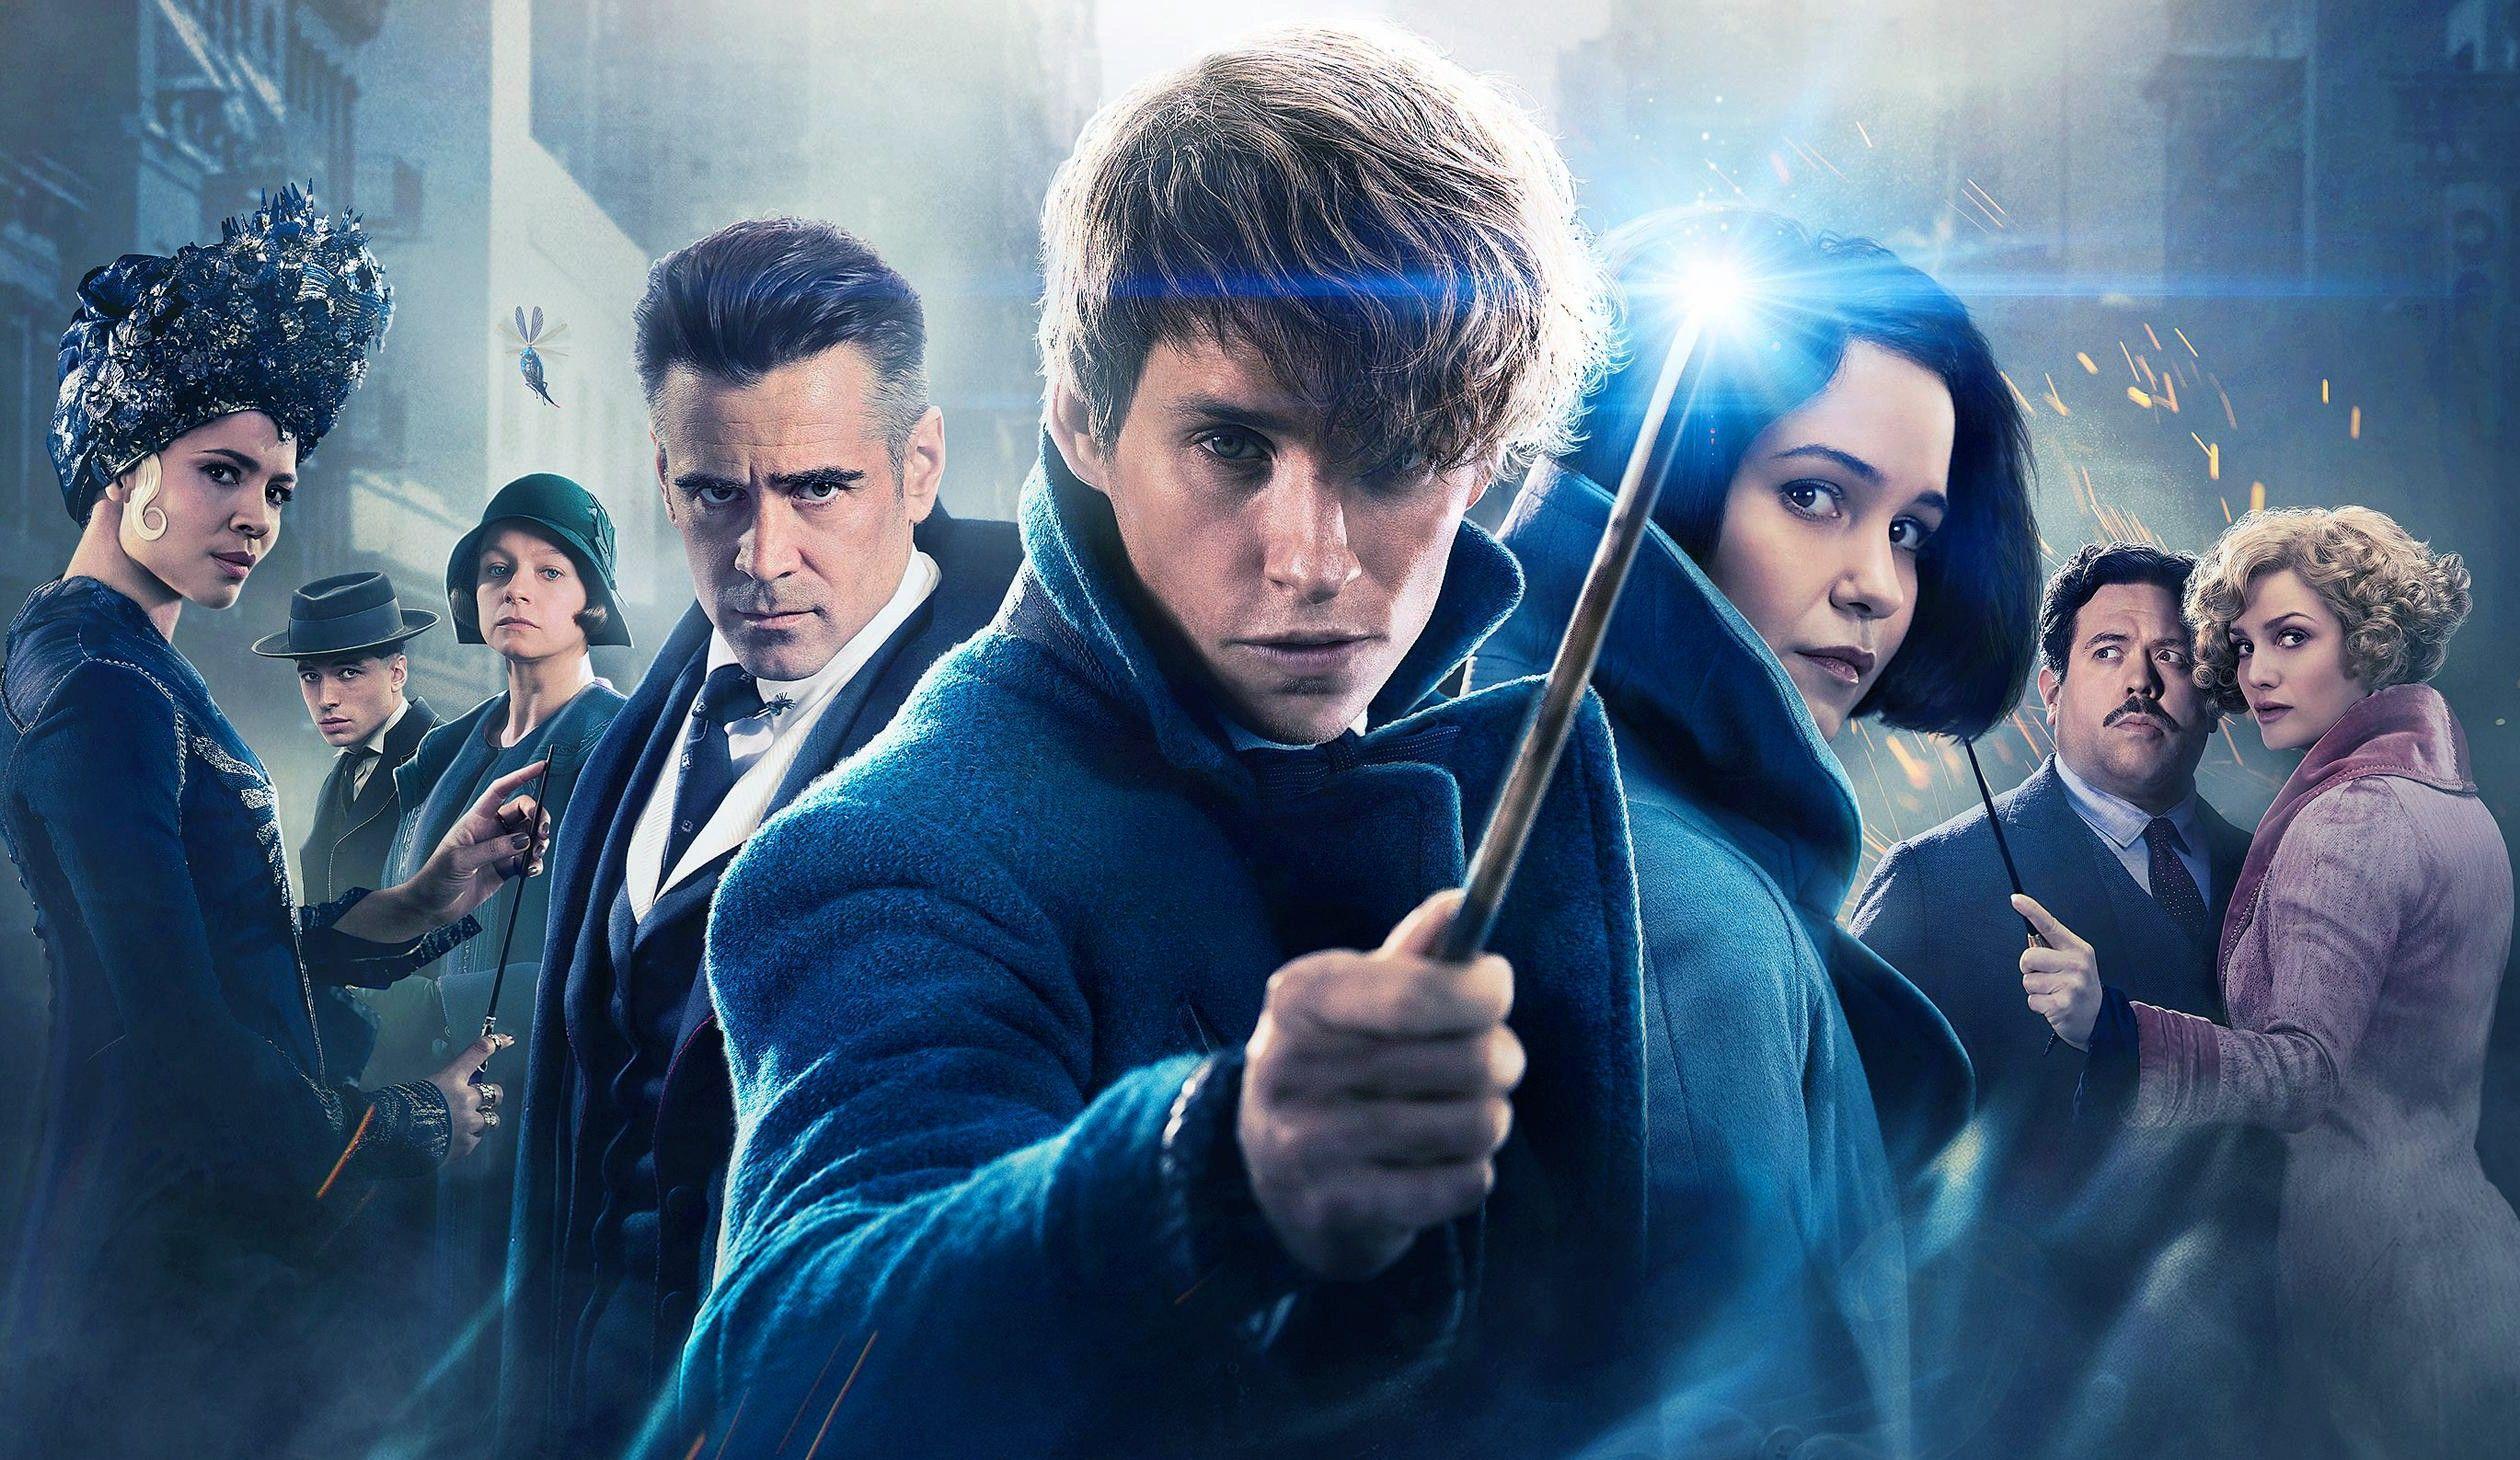 Fantastic Beasts and Where to Find Them Cast Wallpaper, Image